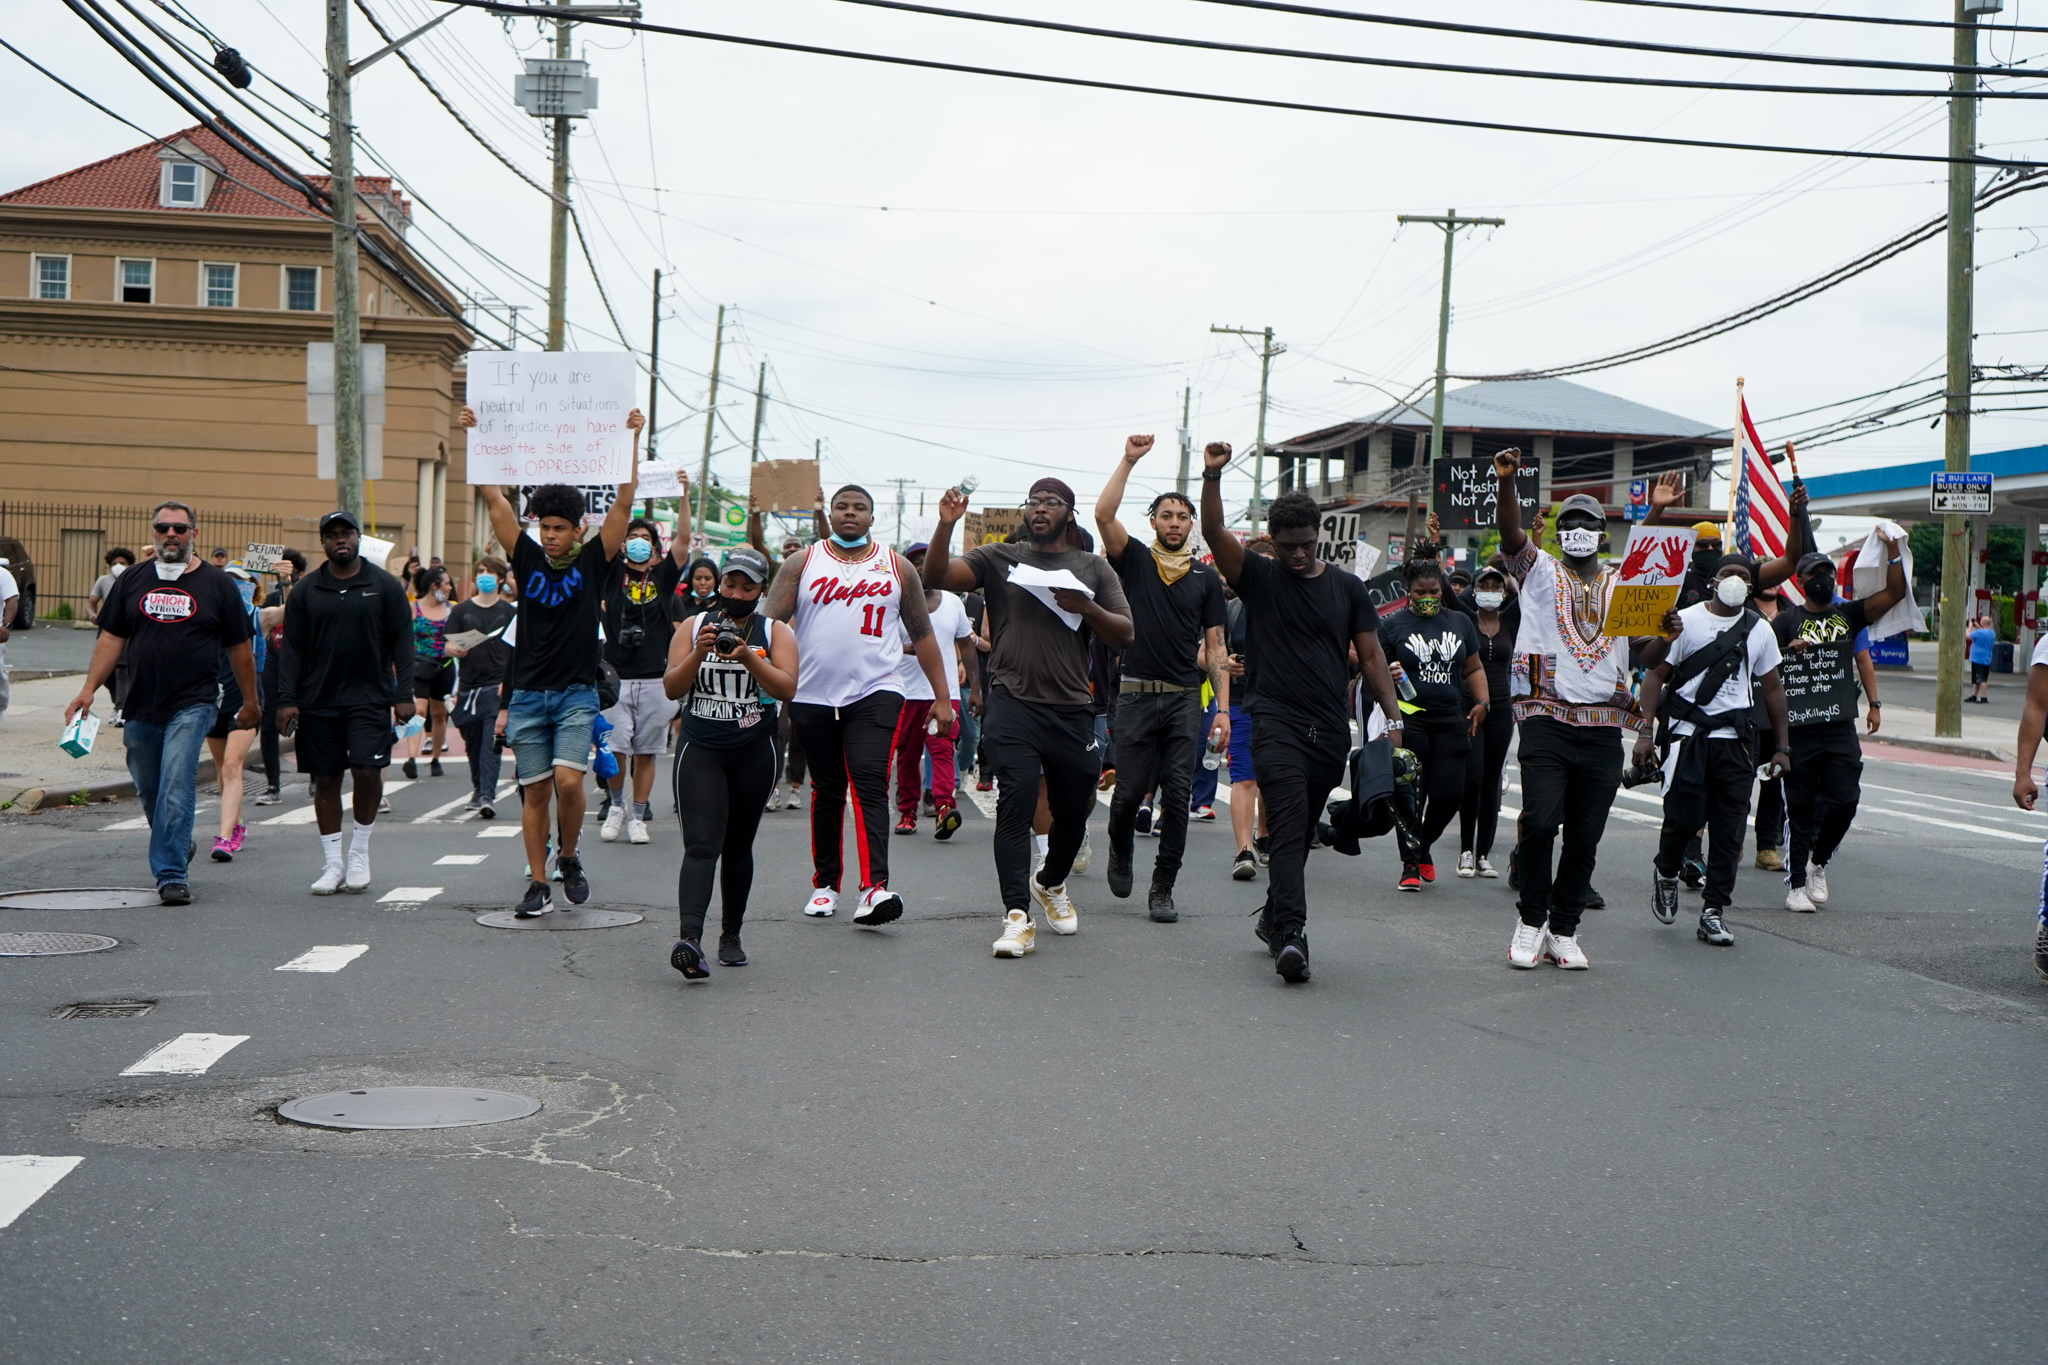 The death of George Floyd sparked protest around the country. Today protesters marched from Targee St. in Concord to the 122nd Precinct stationhouse in New Dorp. Friday, June 5, 2020. (Staten Island Advance/Alexandra Salmieri)